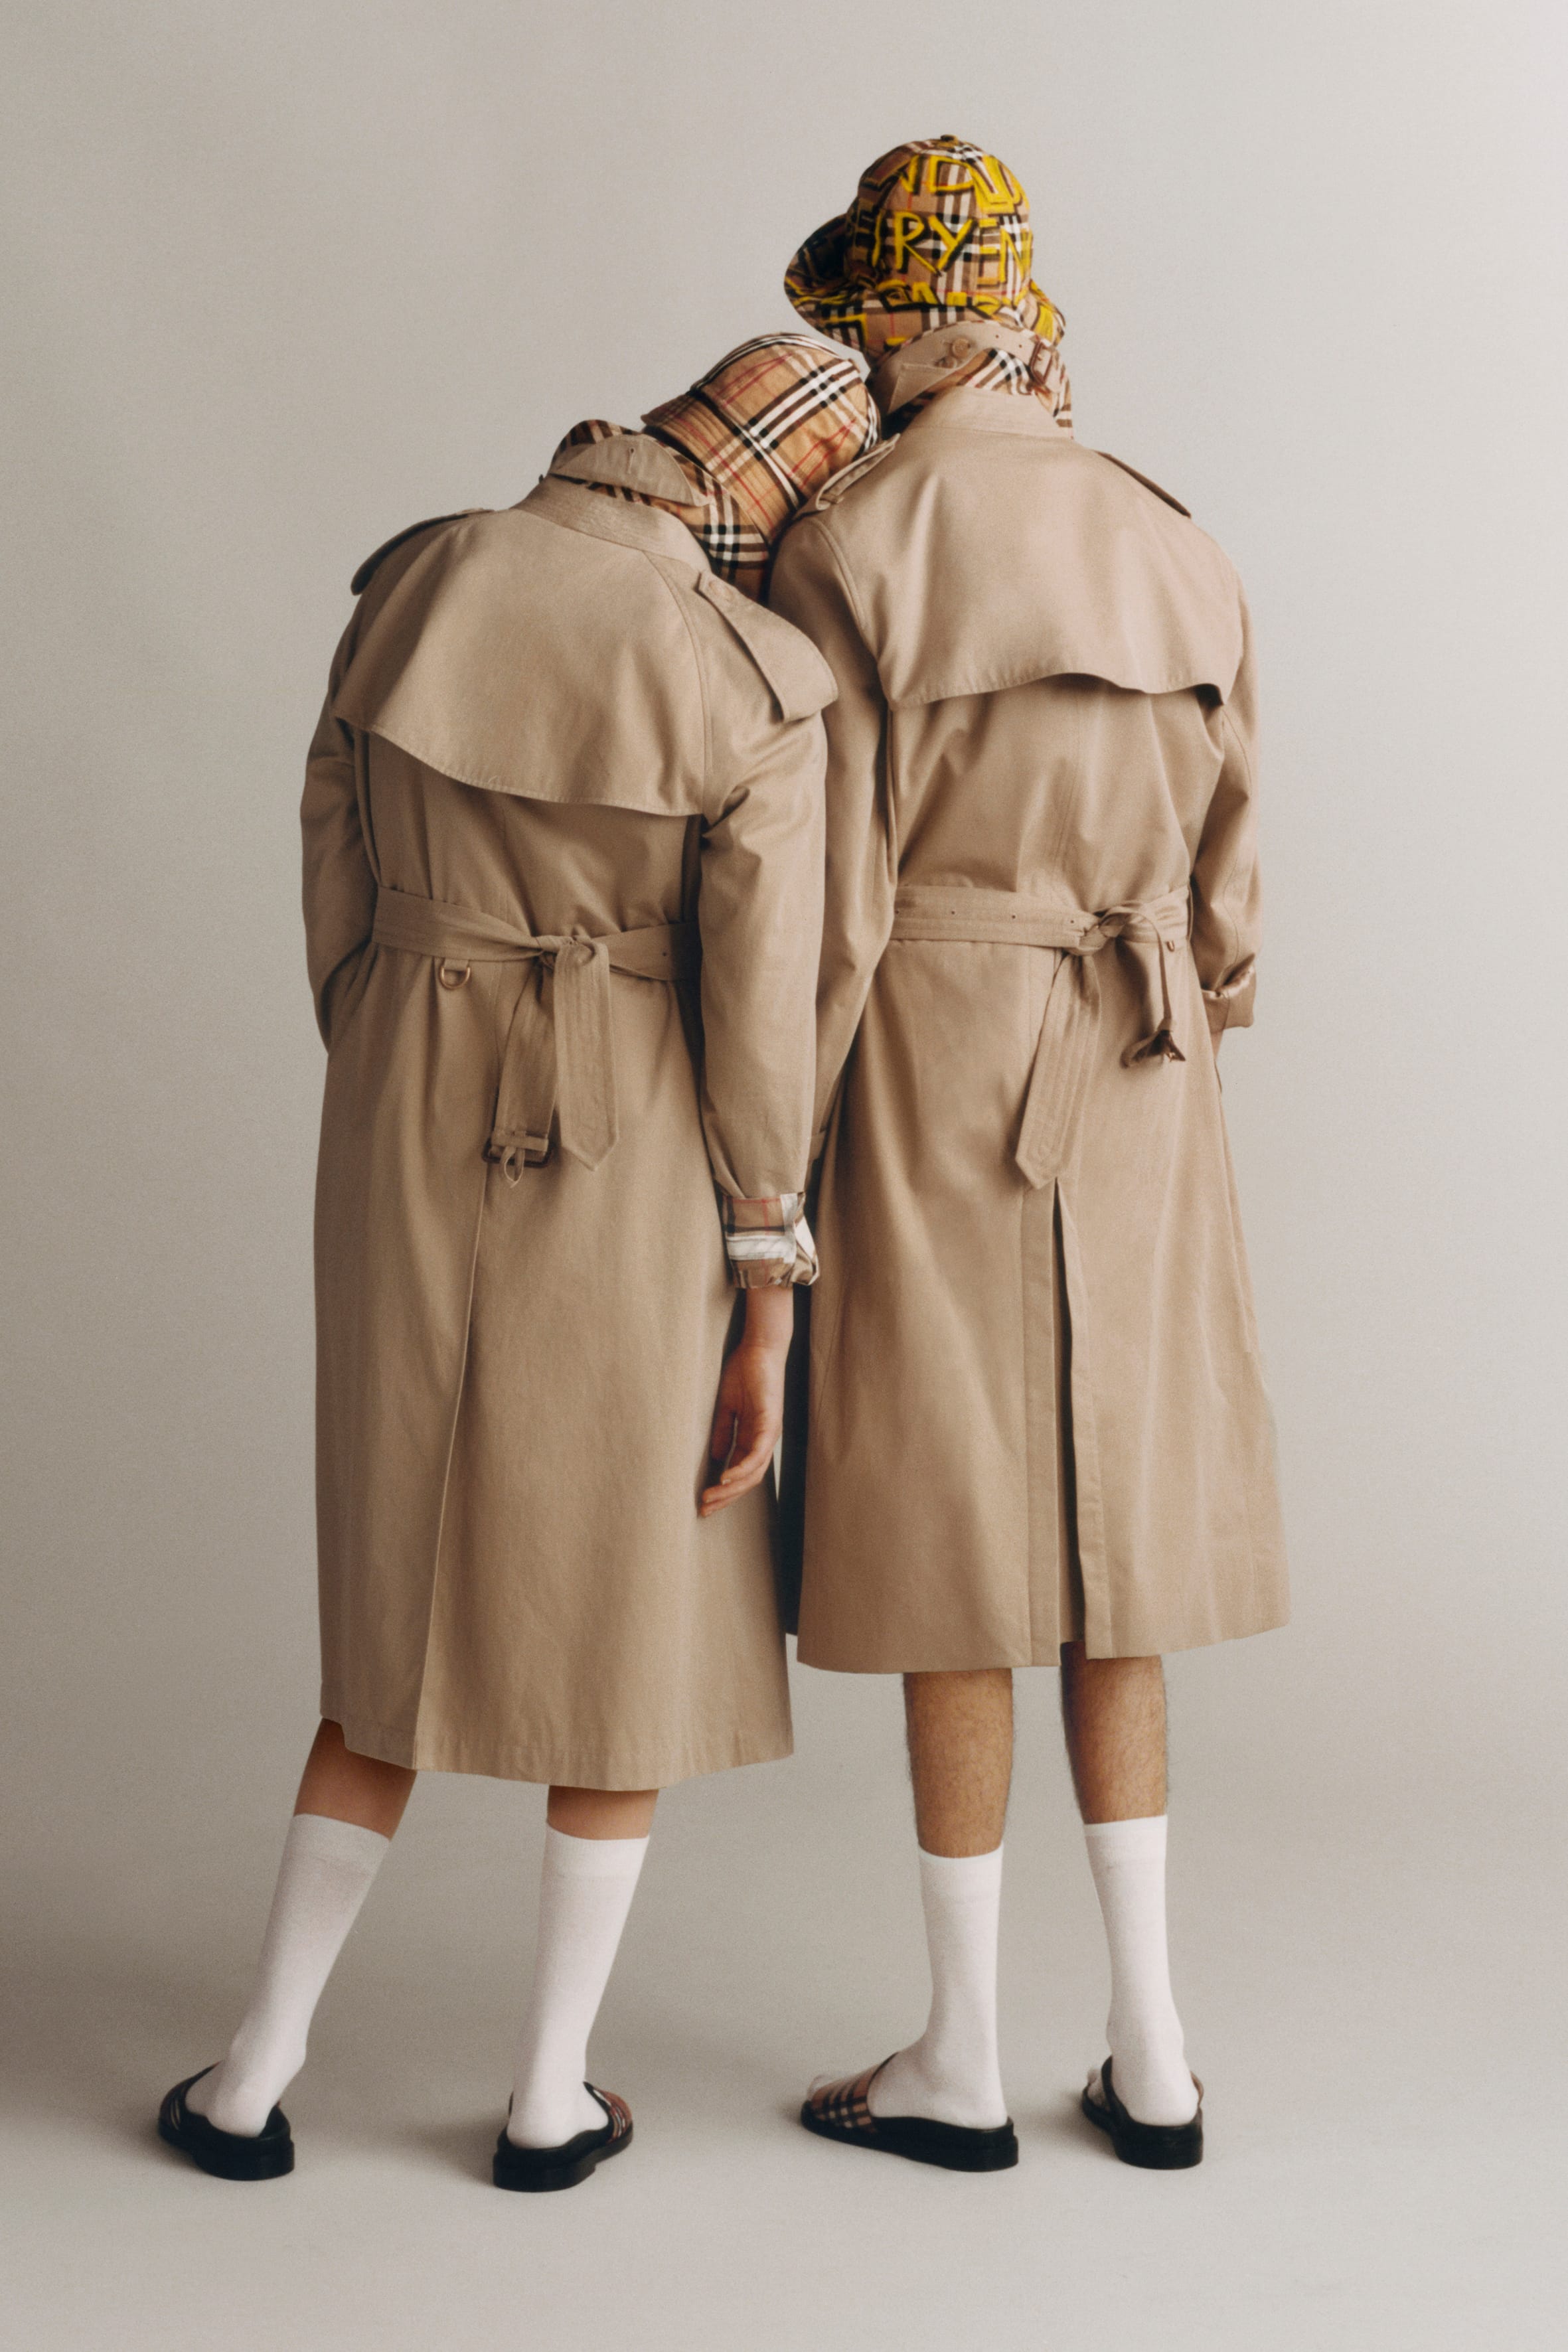 Burberry Iconic Trench Coat Reimagined 